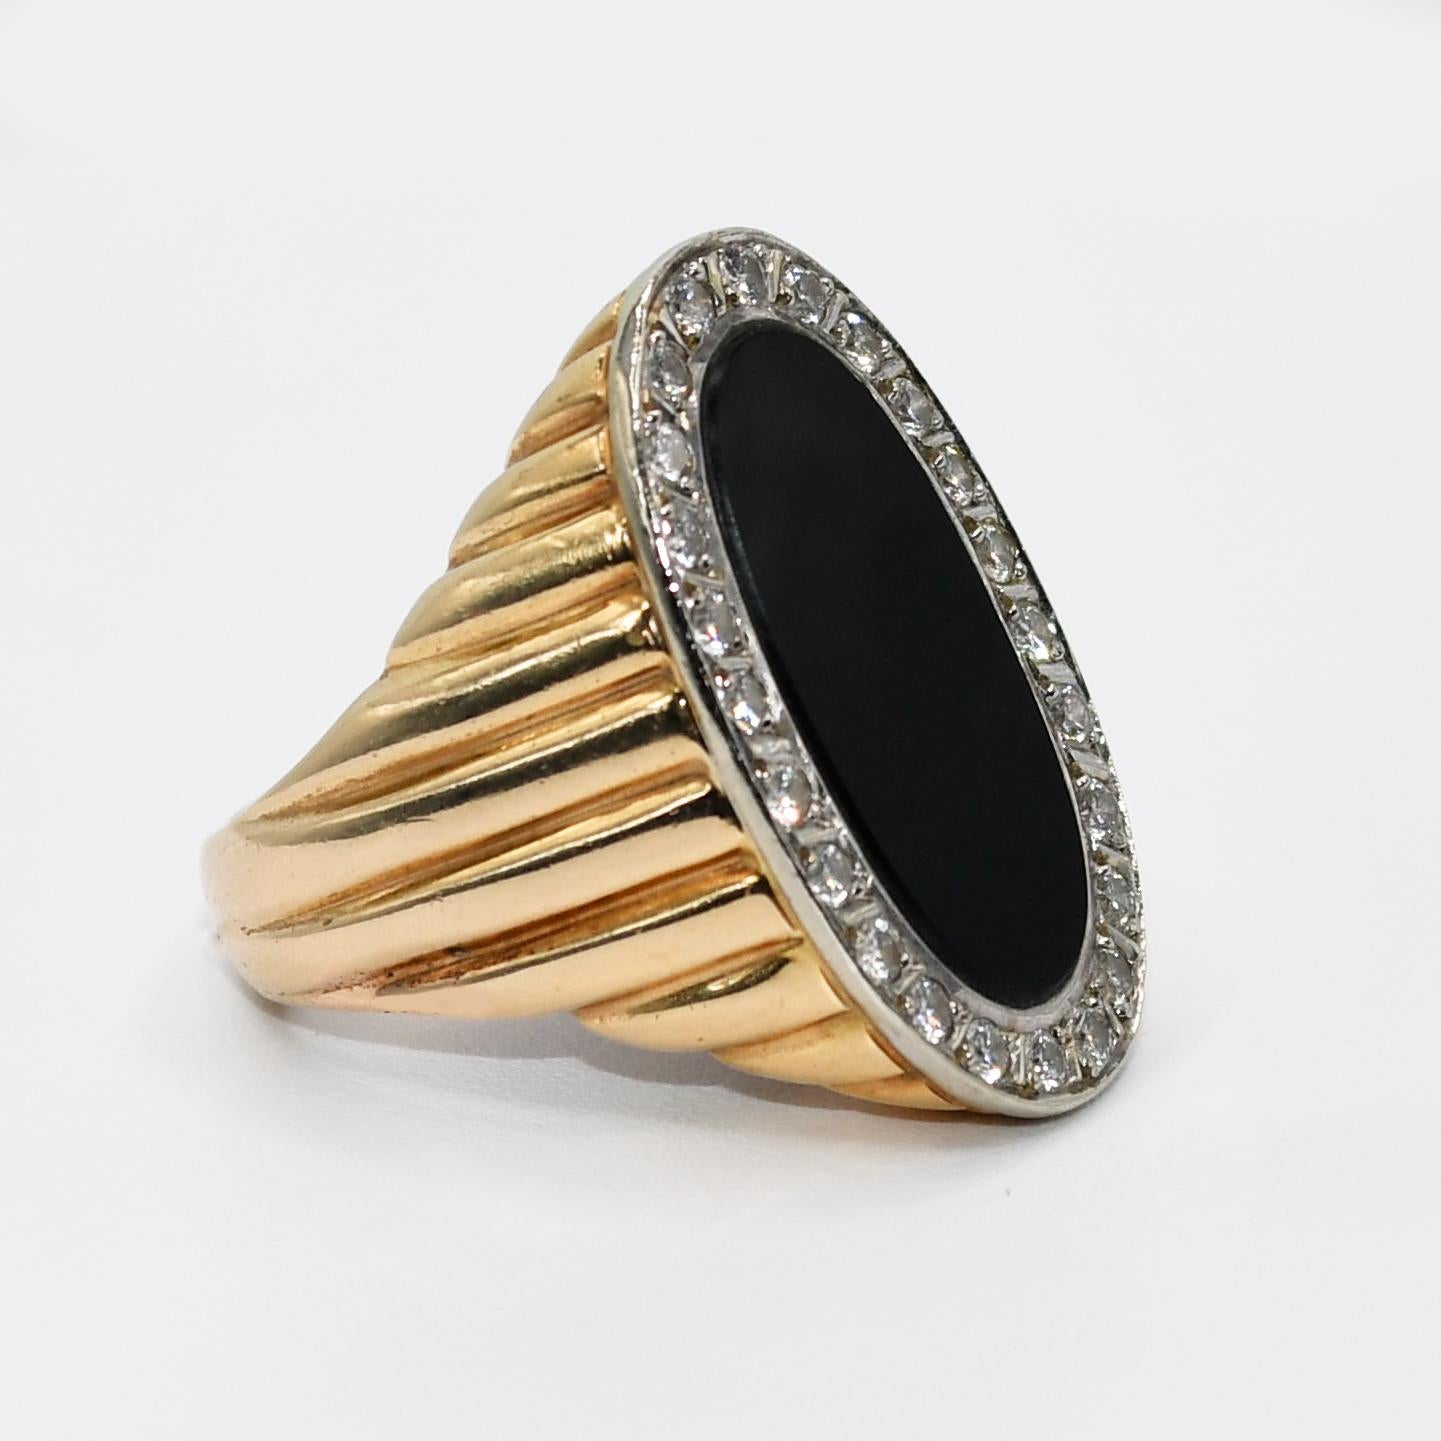 14K Yellow Gold Onyx Diamond Ring, .50tdw, 13.2g

Black onyx and diamond ring in 14k yellow gold setting.
Tests 14k to 16k with electronic tester and weighs 13.2 grams gross weight.
Oval black onyx with round brilliant cut diamonds.
The diamonds are